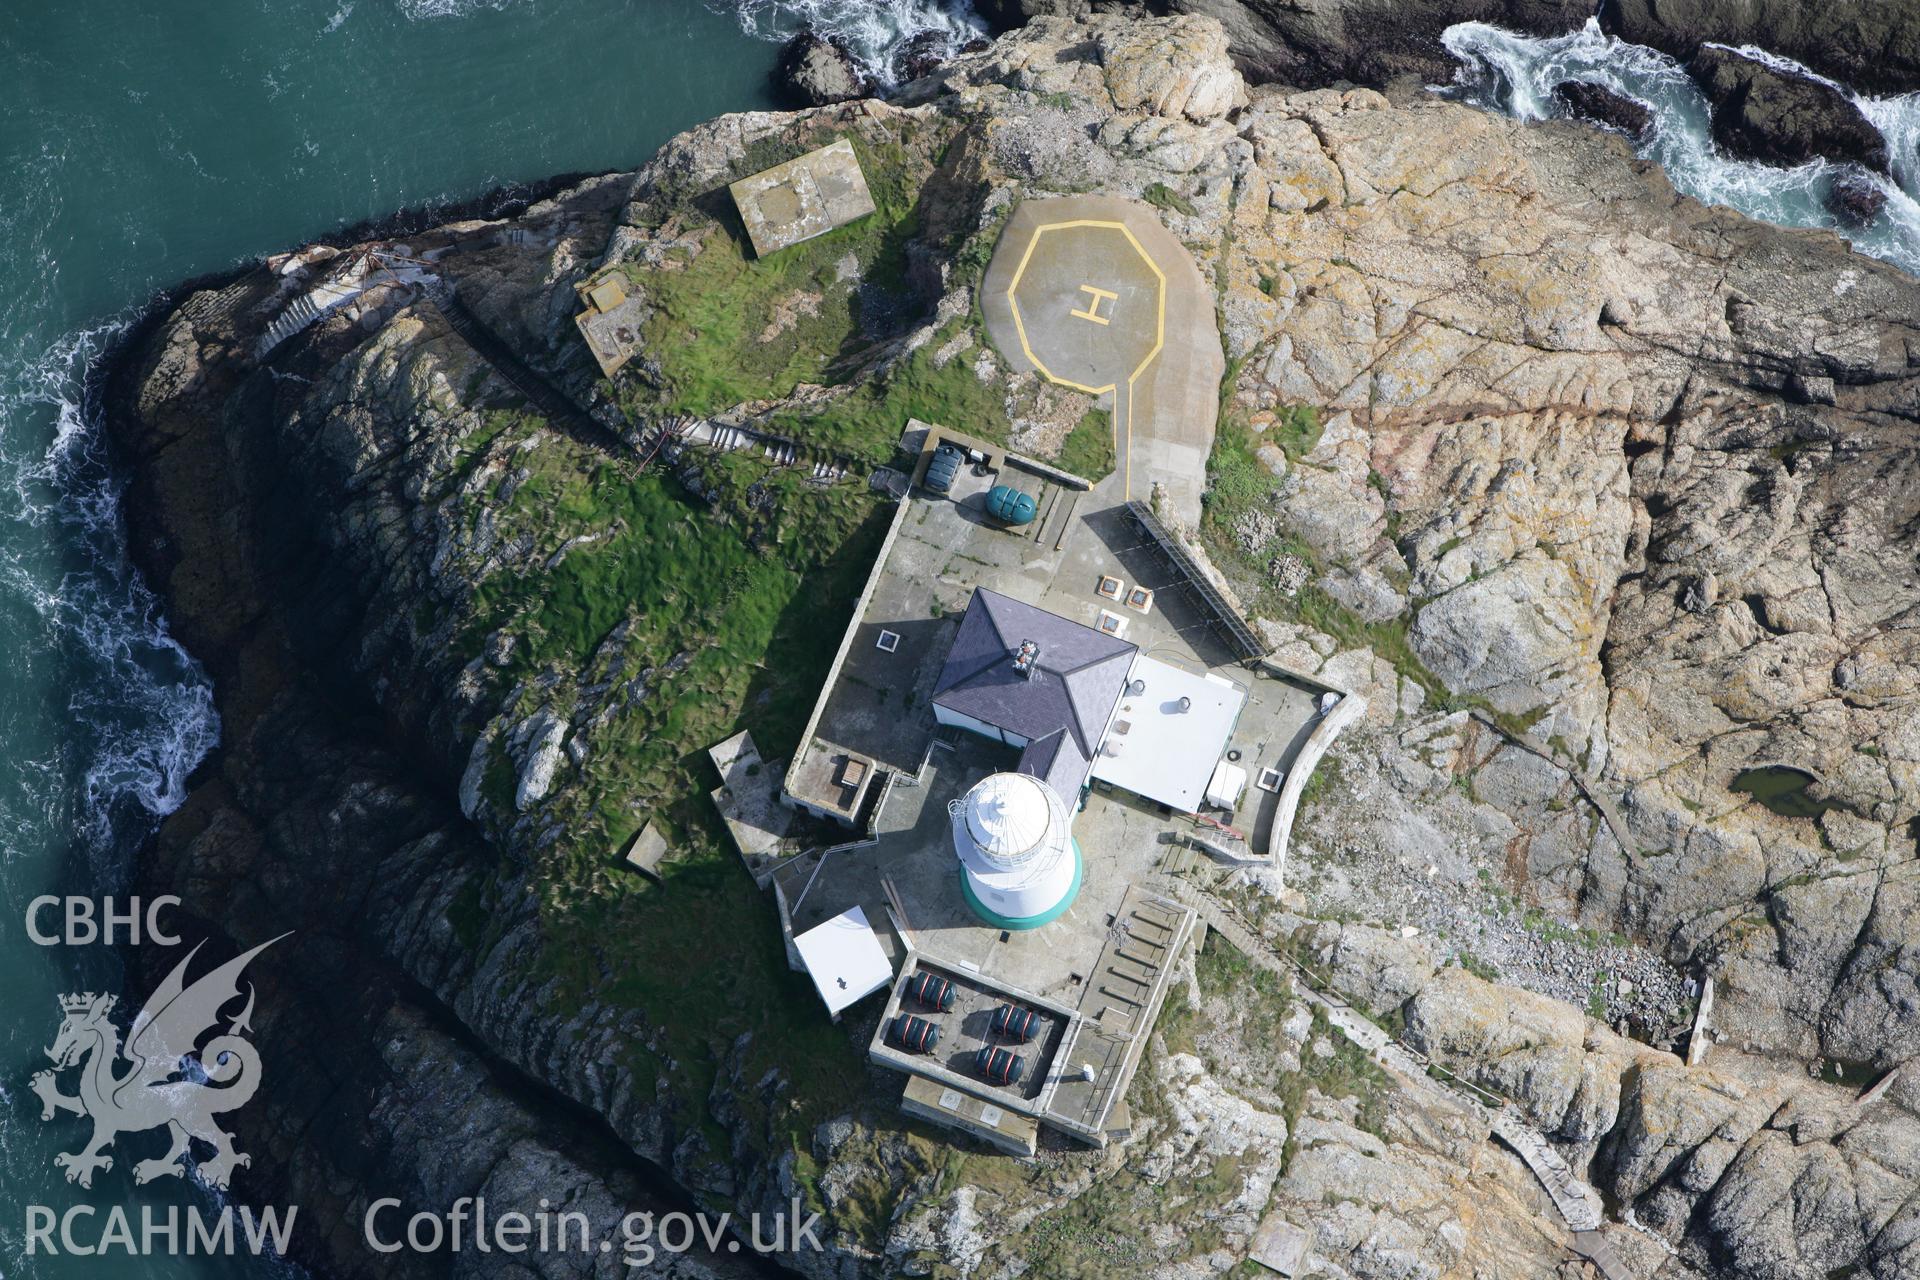 RCAHMW colour oblique photograph of South Bishop Lighthouse, west of Ramsey Island. Taken by Toby Driver on 09/09/2010.